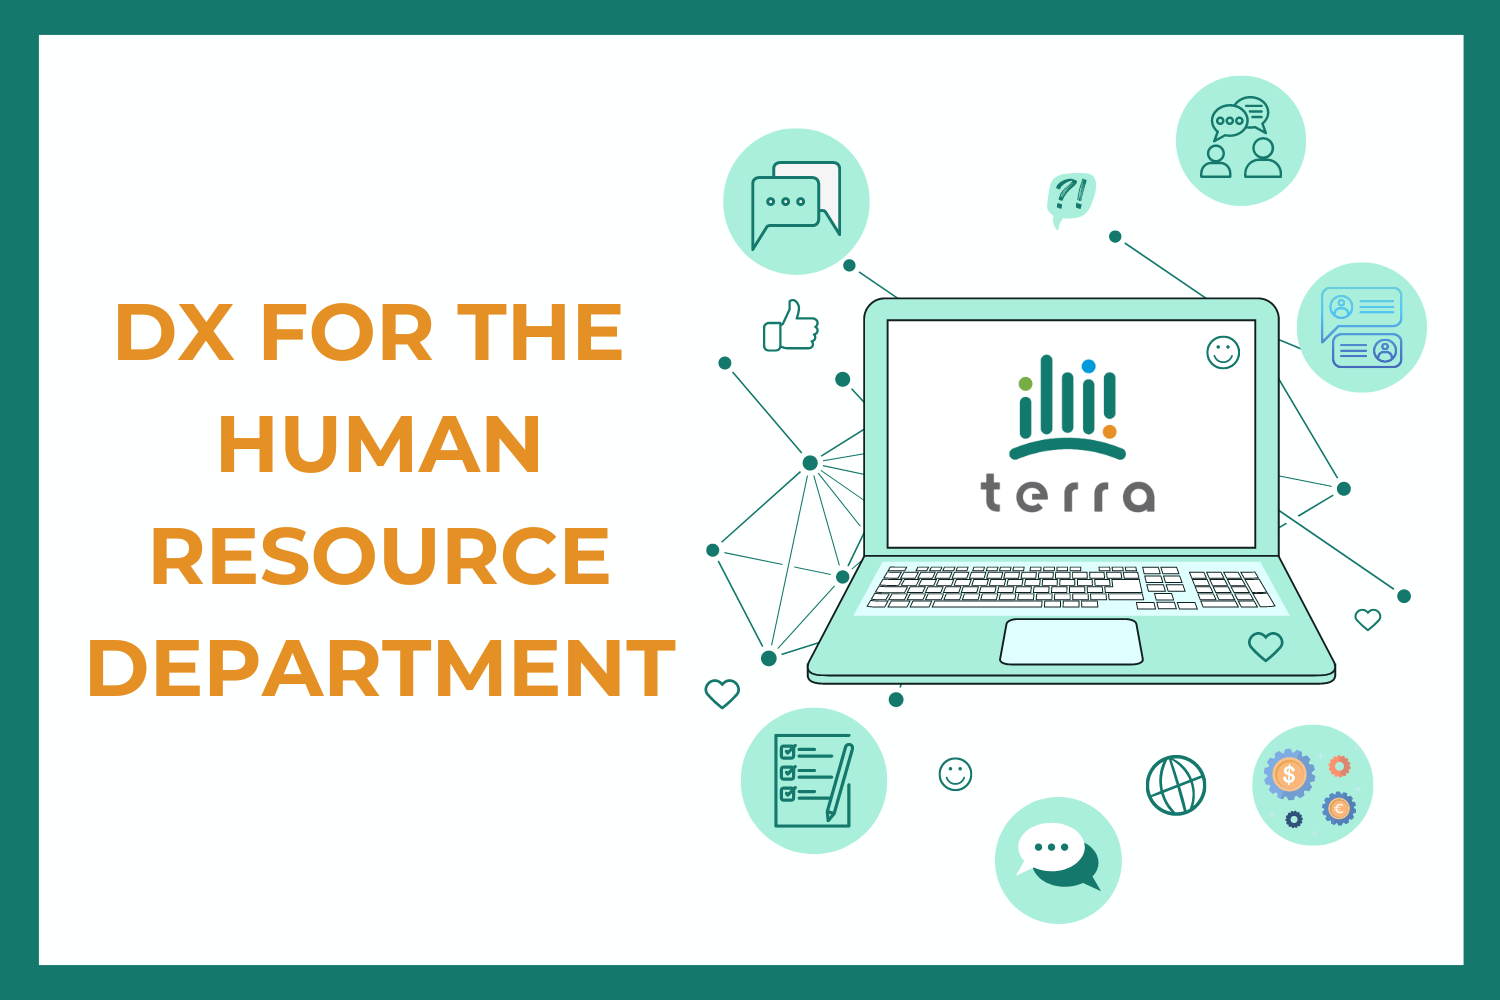 [Personnel Labor DX] Cloud-based human resource management service “terra” for HR and payroll calculator departments in Vietnam